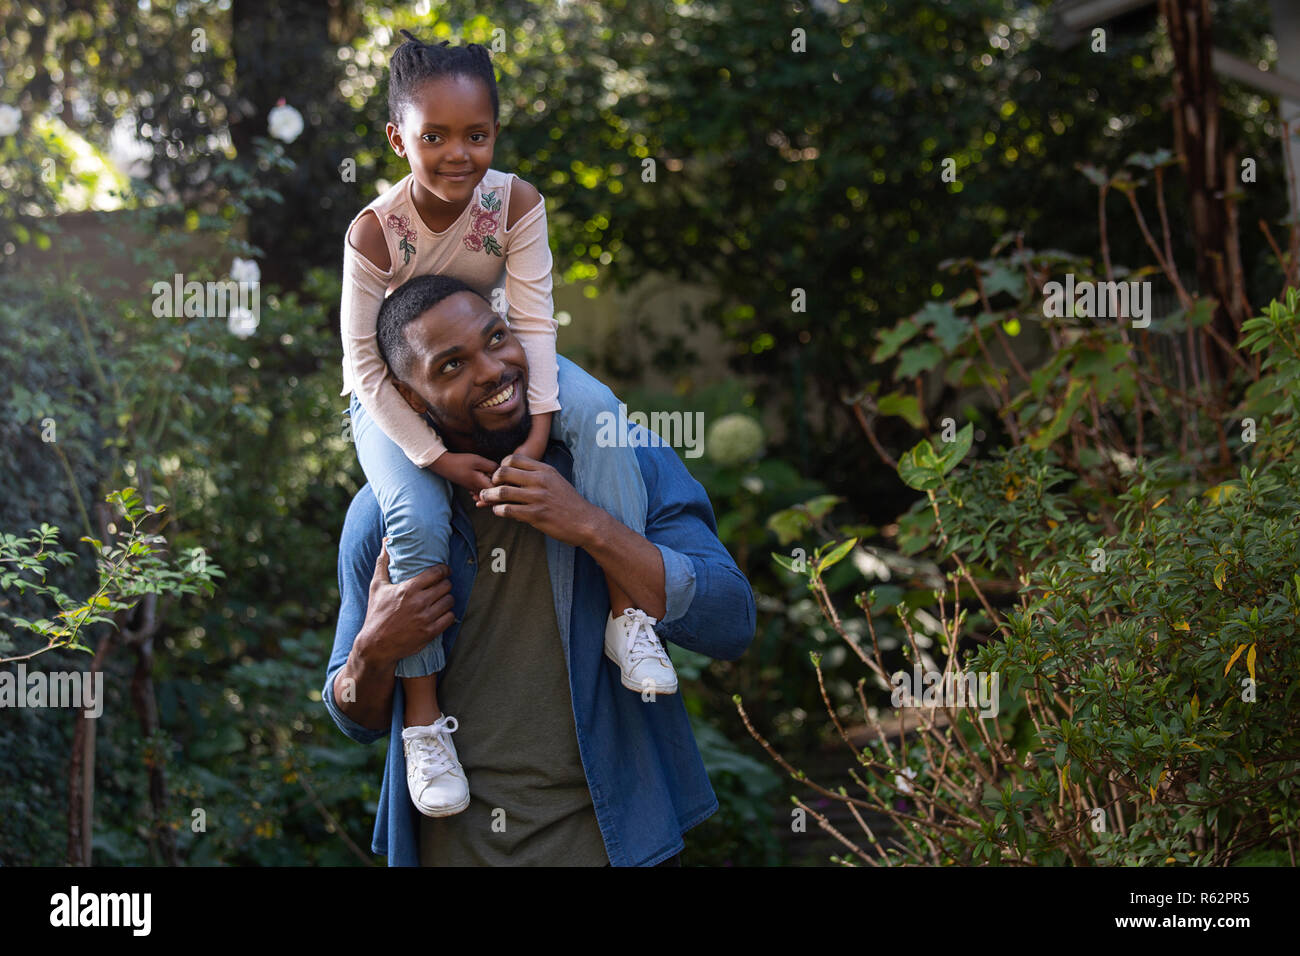 A girl sitting on her fathers shoulders in a garden Stock Photo